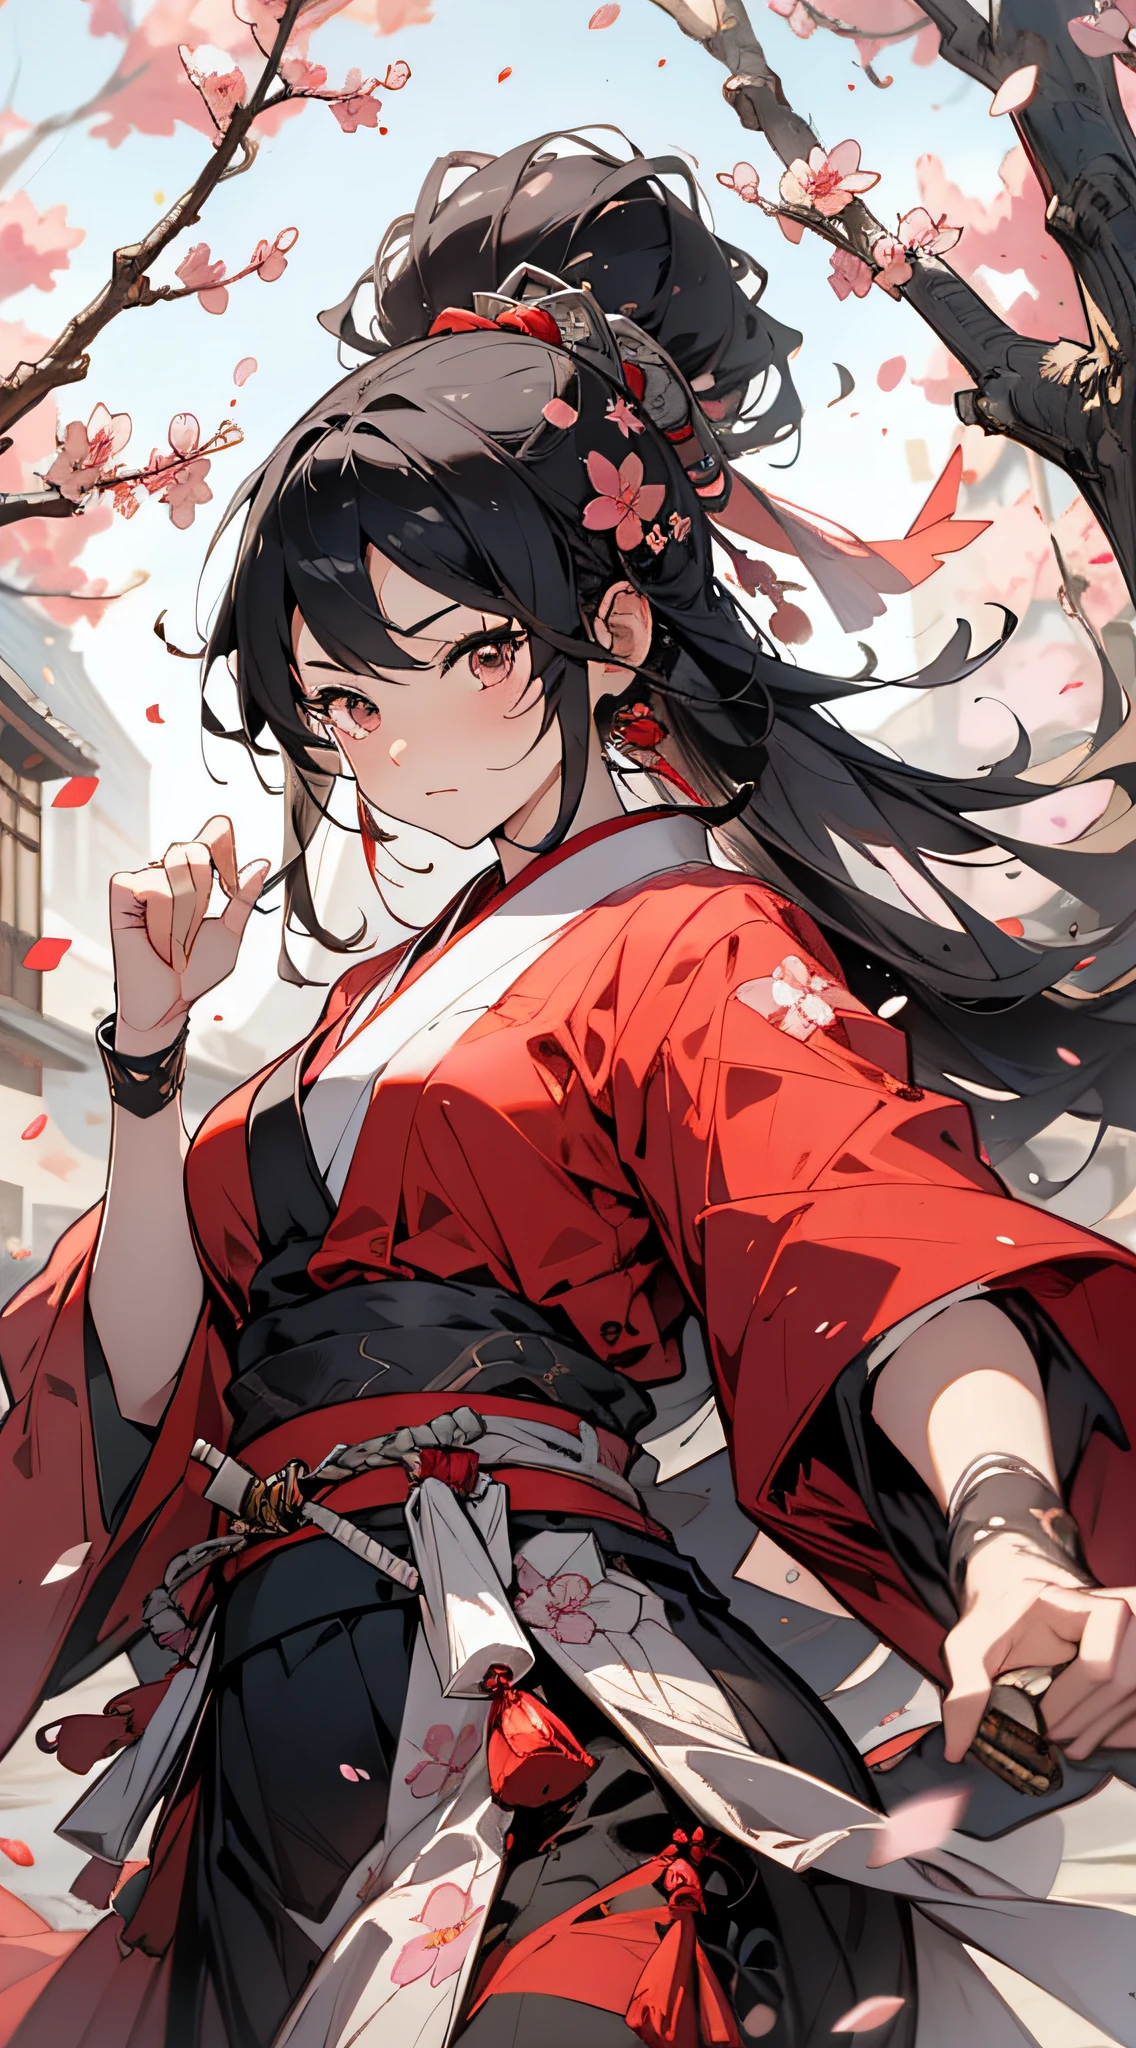 Masterpiece, super high resolution, perfect picture quality, ink style, chivalrous girl, red Japanese costume, holding a Japanese sword, dancing, cherry blossoms falling, petals flying, silver bells jingling, fascinating.